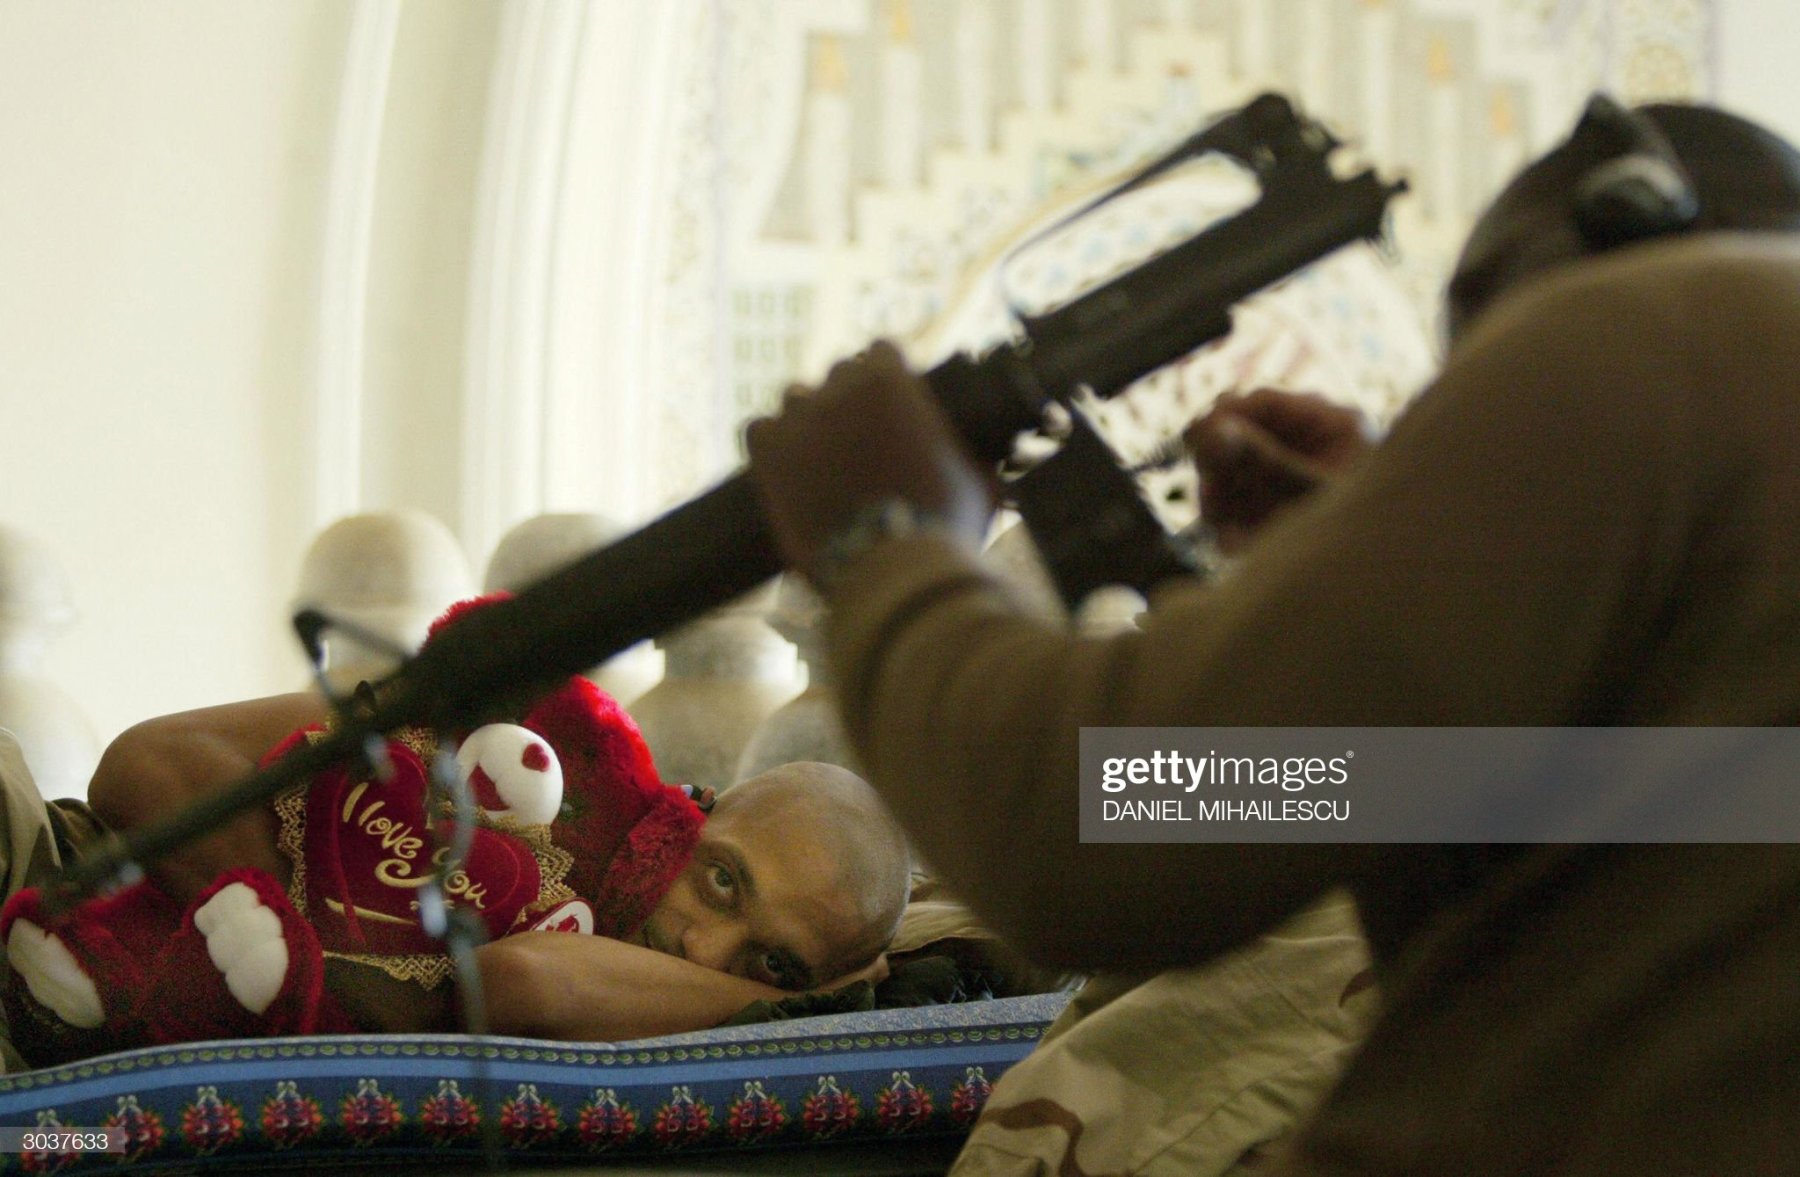 TIKRIT, IRAQ:  US Army Staff Sergeant Temu Gibson (L) from the 4th Infantry Division Ironhorse hugs a teddy bear, a gift from his wife, while he speaks to a comrade cleaning a weapon in Saddam Hussein's hometown Tikrit, north of Baghdad, 03 March 2004. Over 700 military personnel will by leaving until 15 March 2004 back to their homebase in Texas. AFP PHOTO/Daniel MIHAILESCU  (Photo credit should read DANIEL MIHAILESCU/AFP via Getty Images)